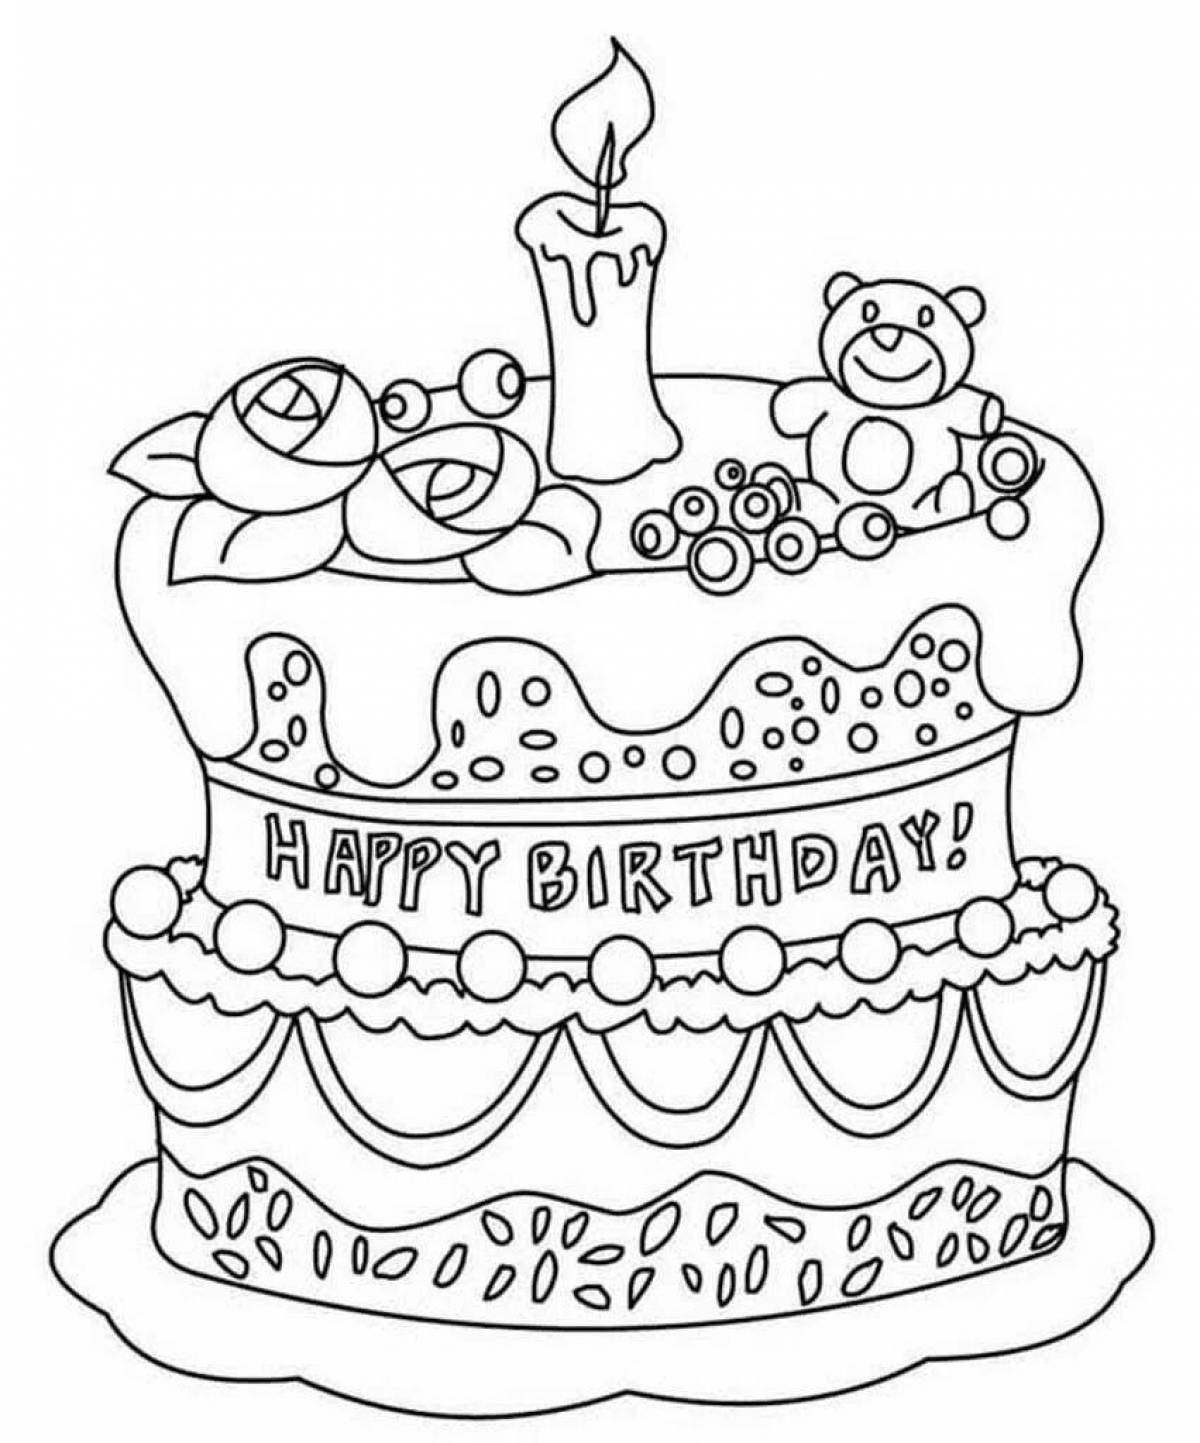 Fun coloring cake for 3-4 year olds